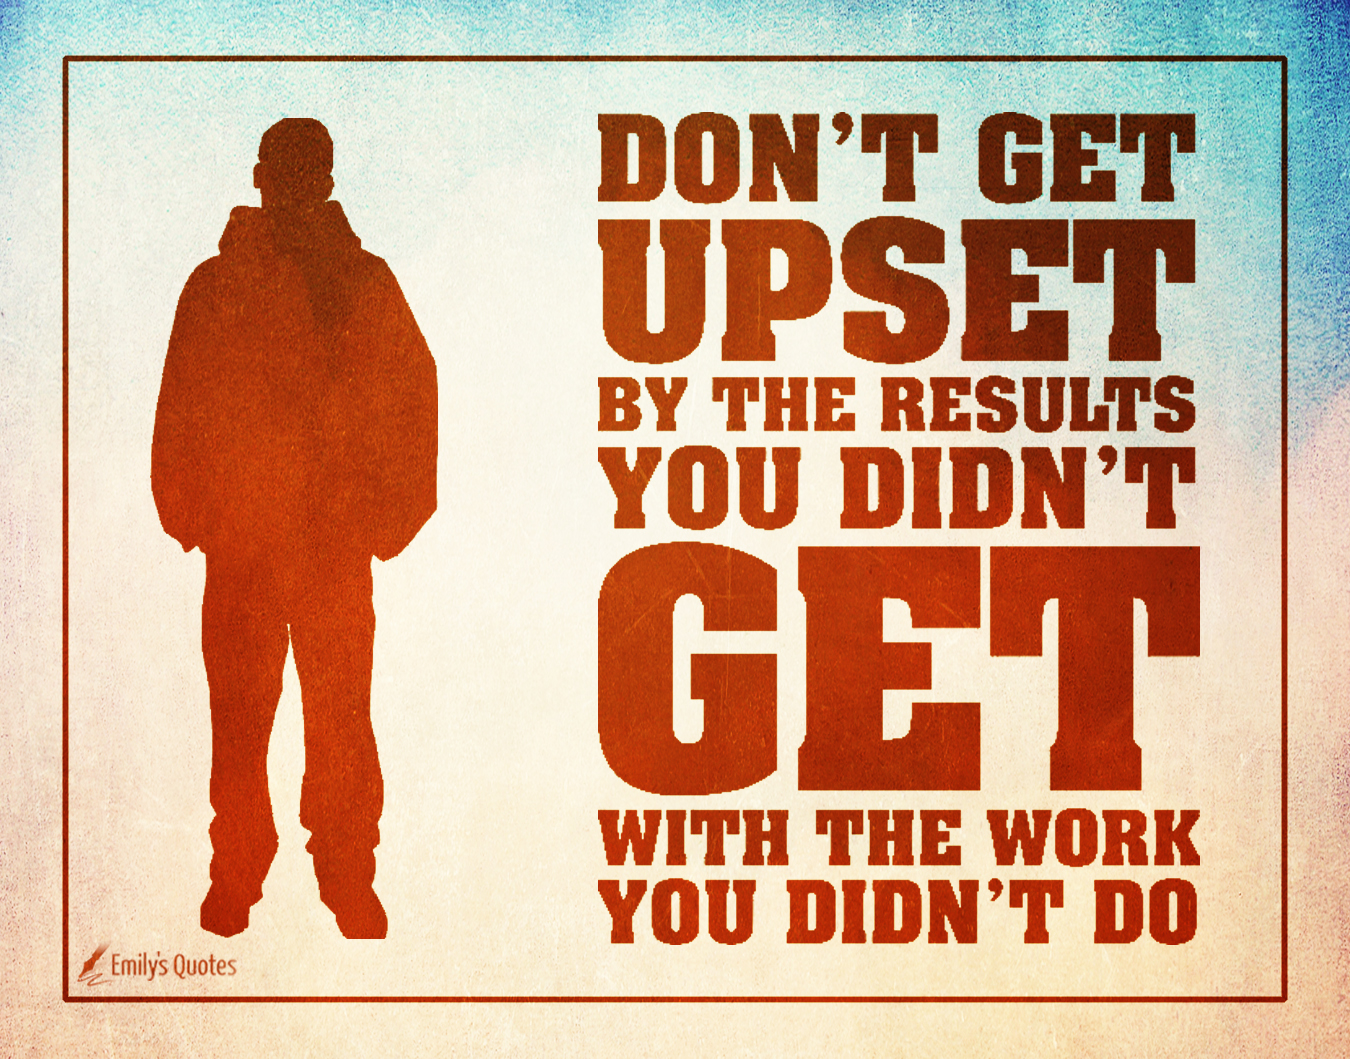 Don’t be upset by the results you didn’t get with the work you didn’t do